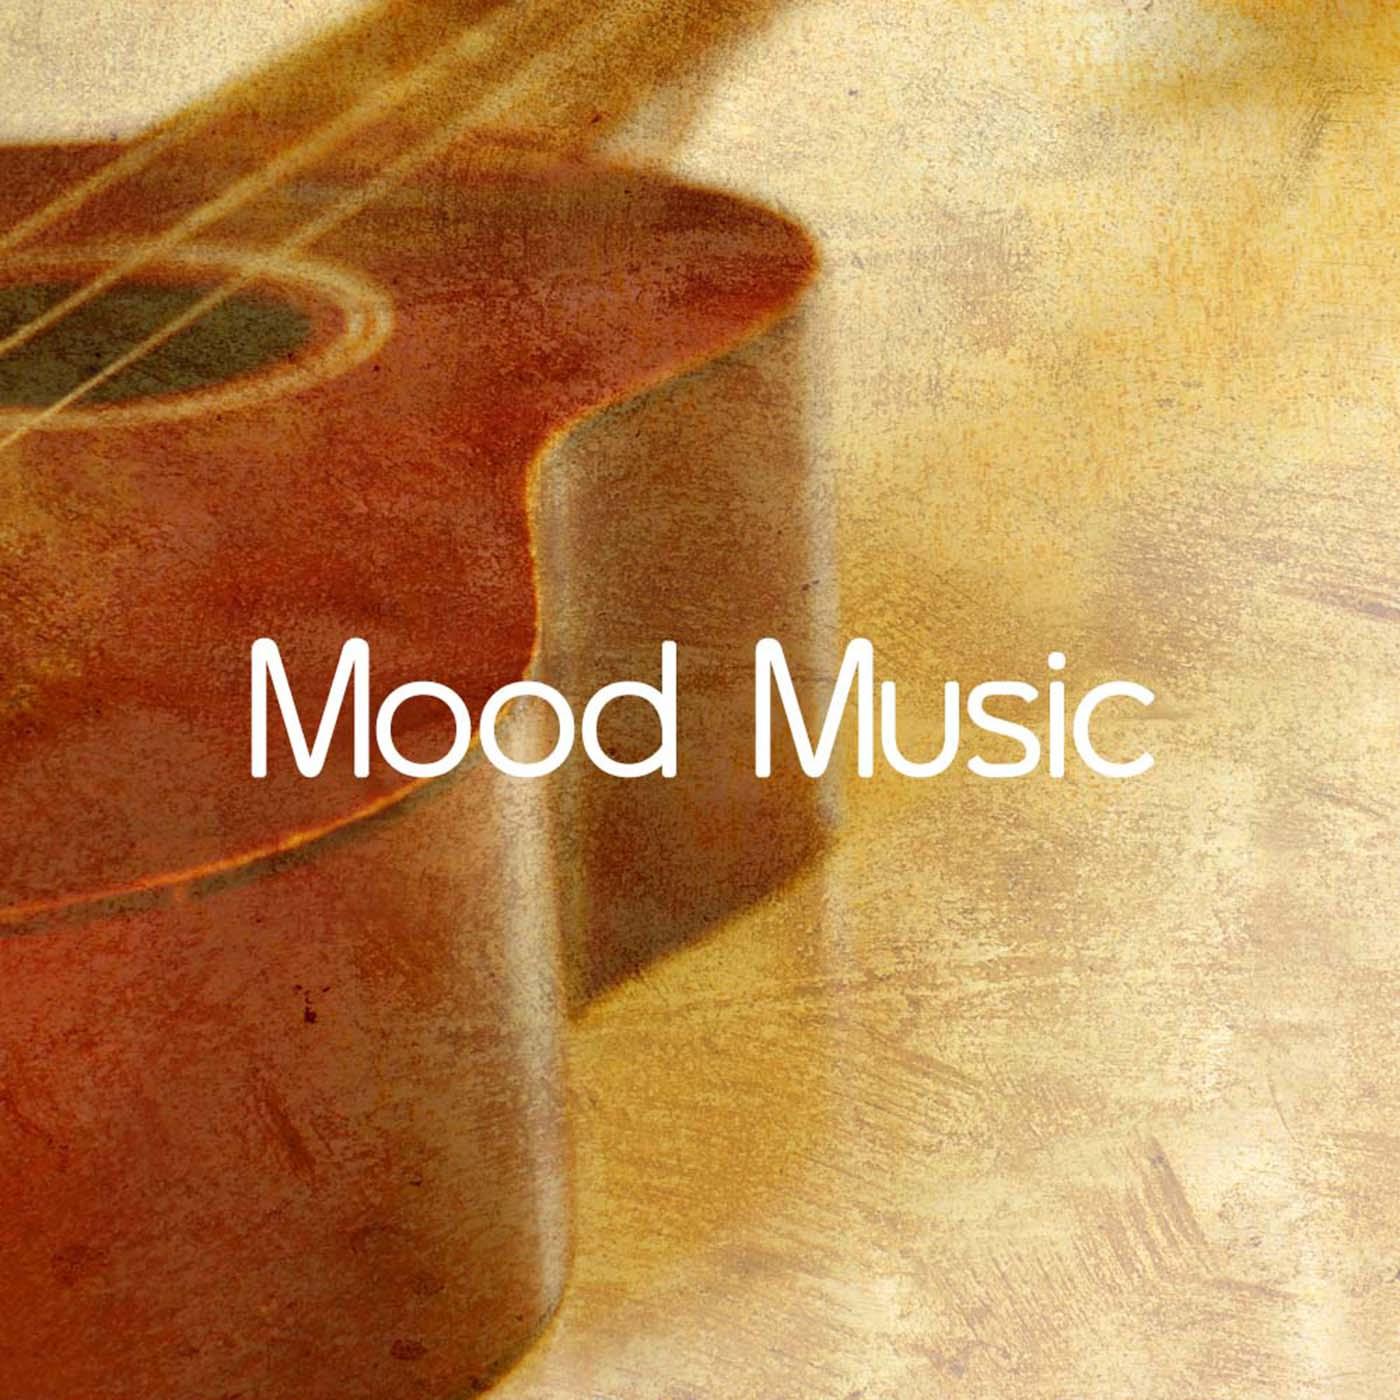 Mood Music - Soft Background Music for Relaxation, Dinner Party, Restaurant, Studying and Reading